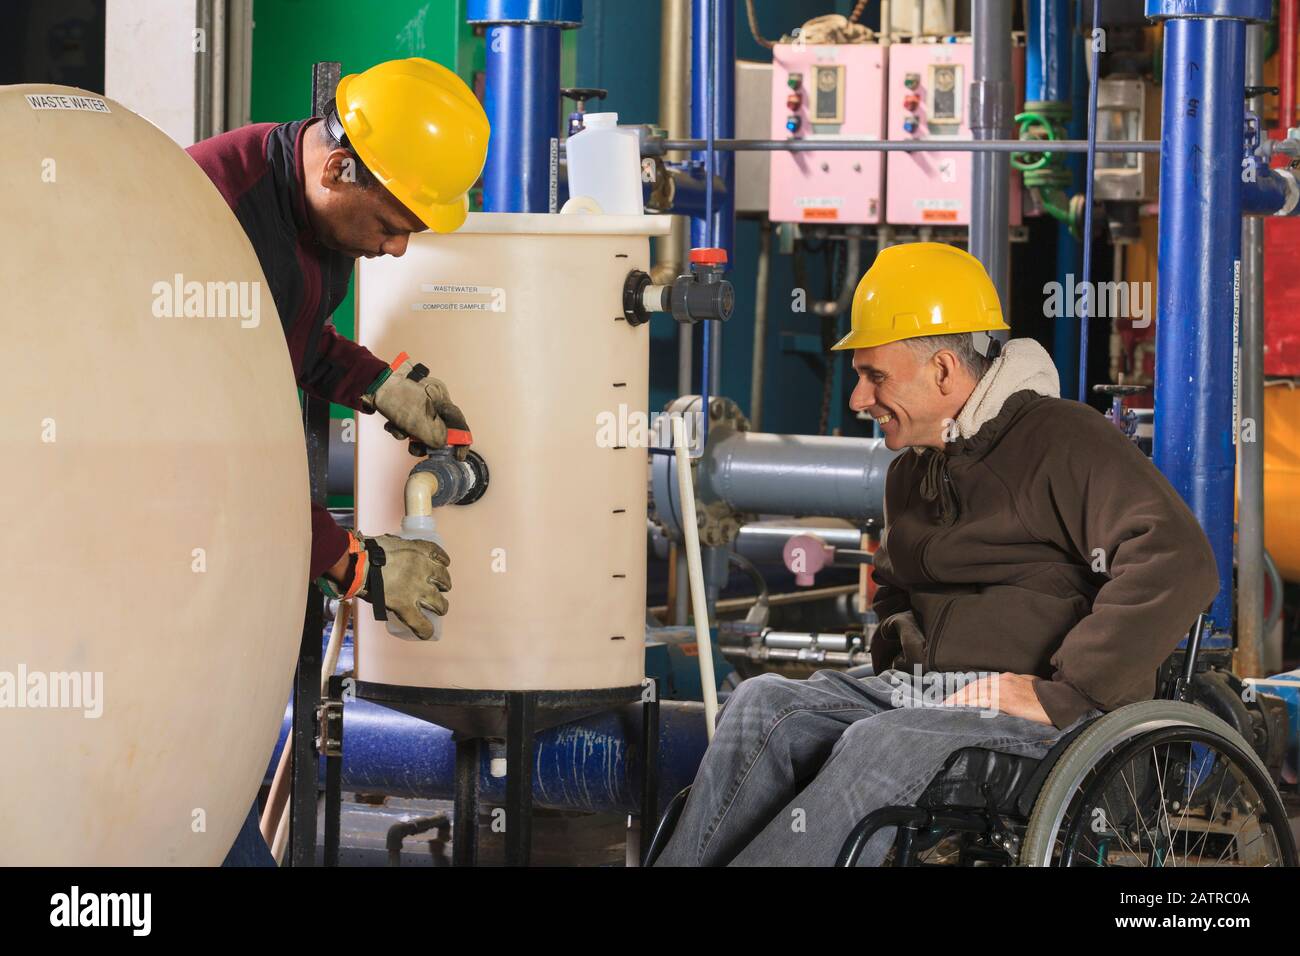 Disabled worker and a co-worker working in an industrial workplace Stock Photo